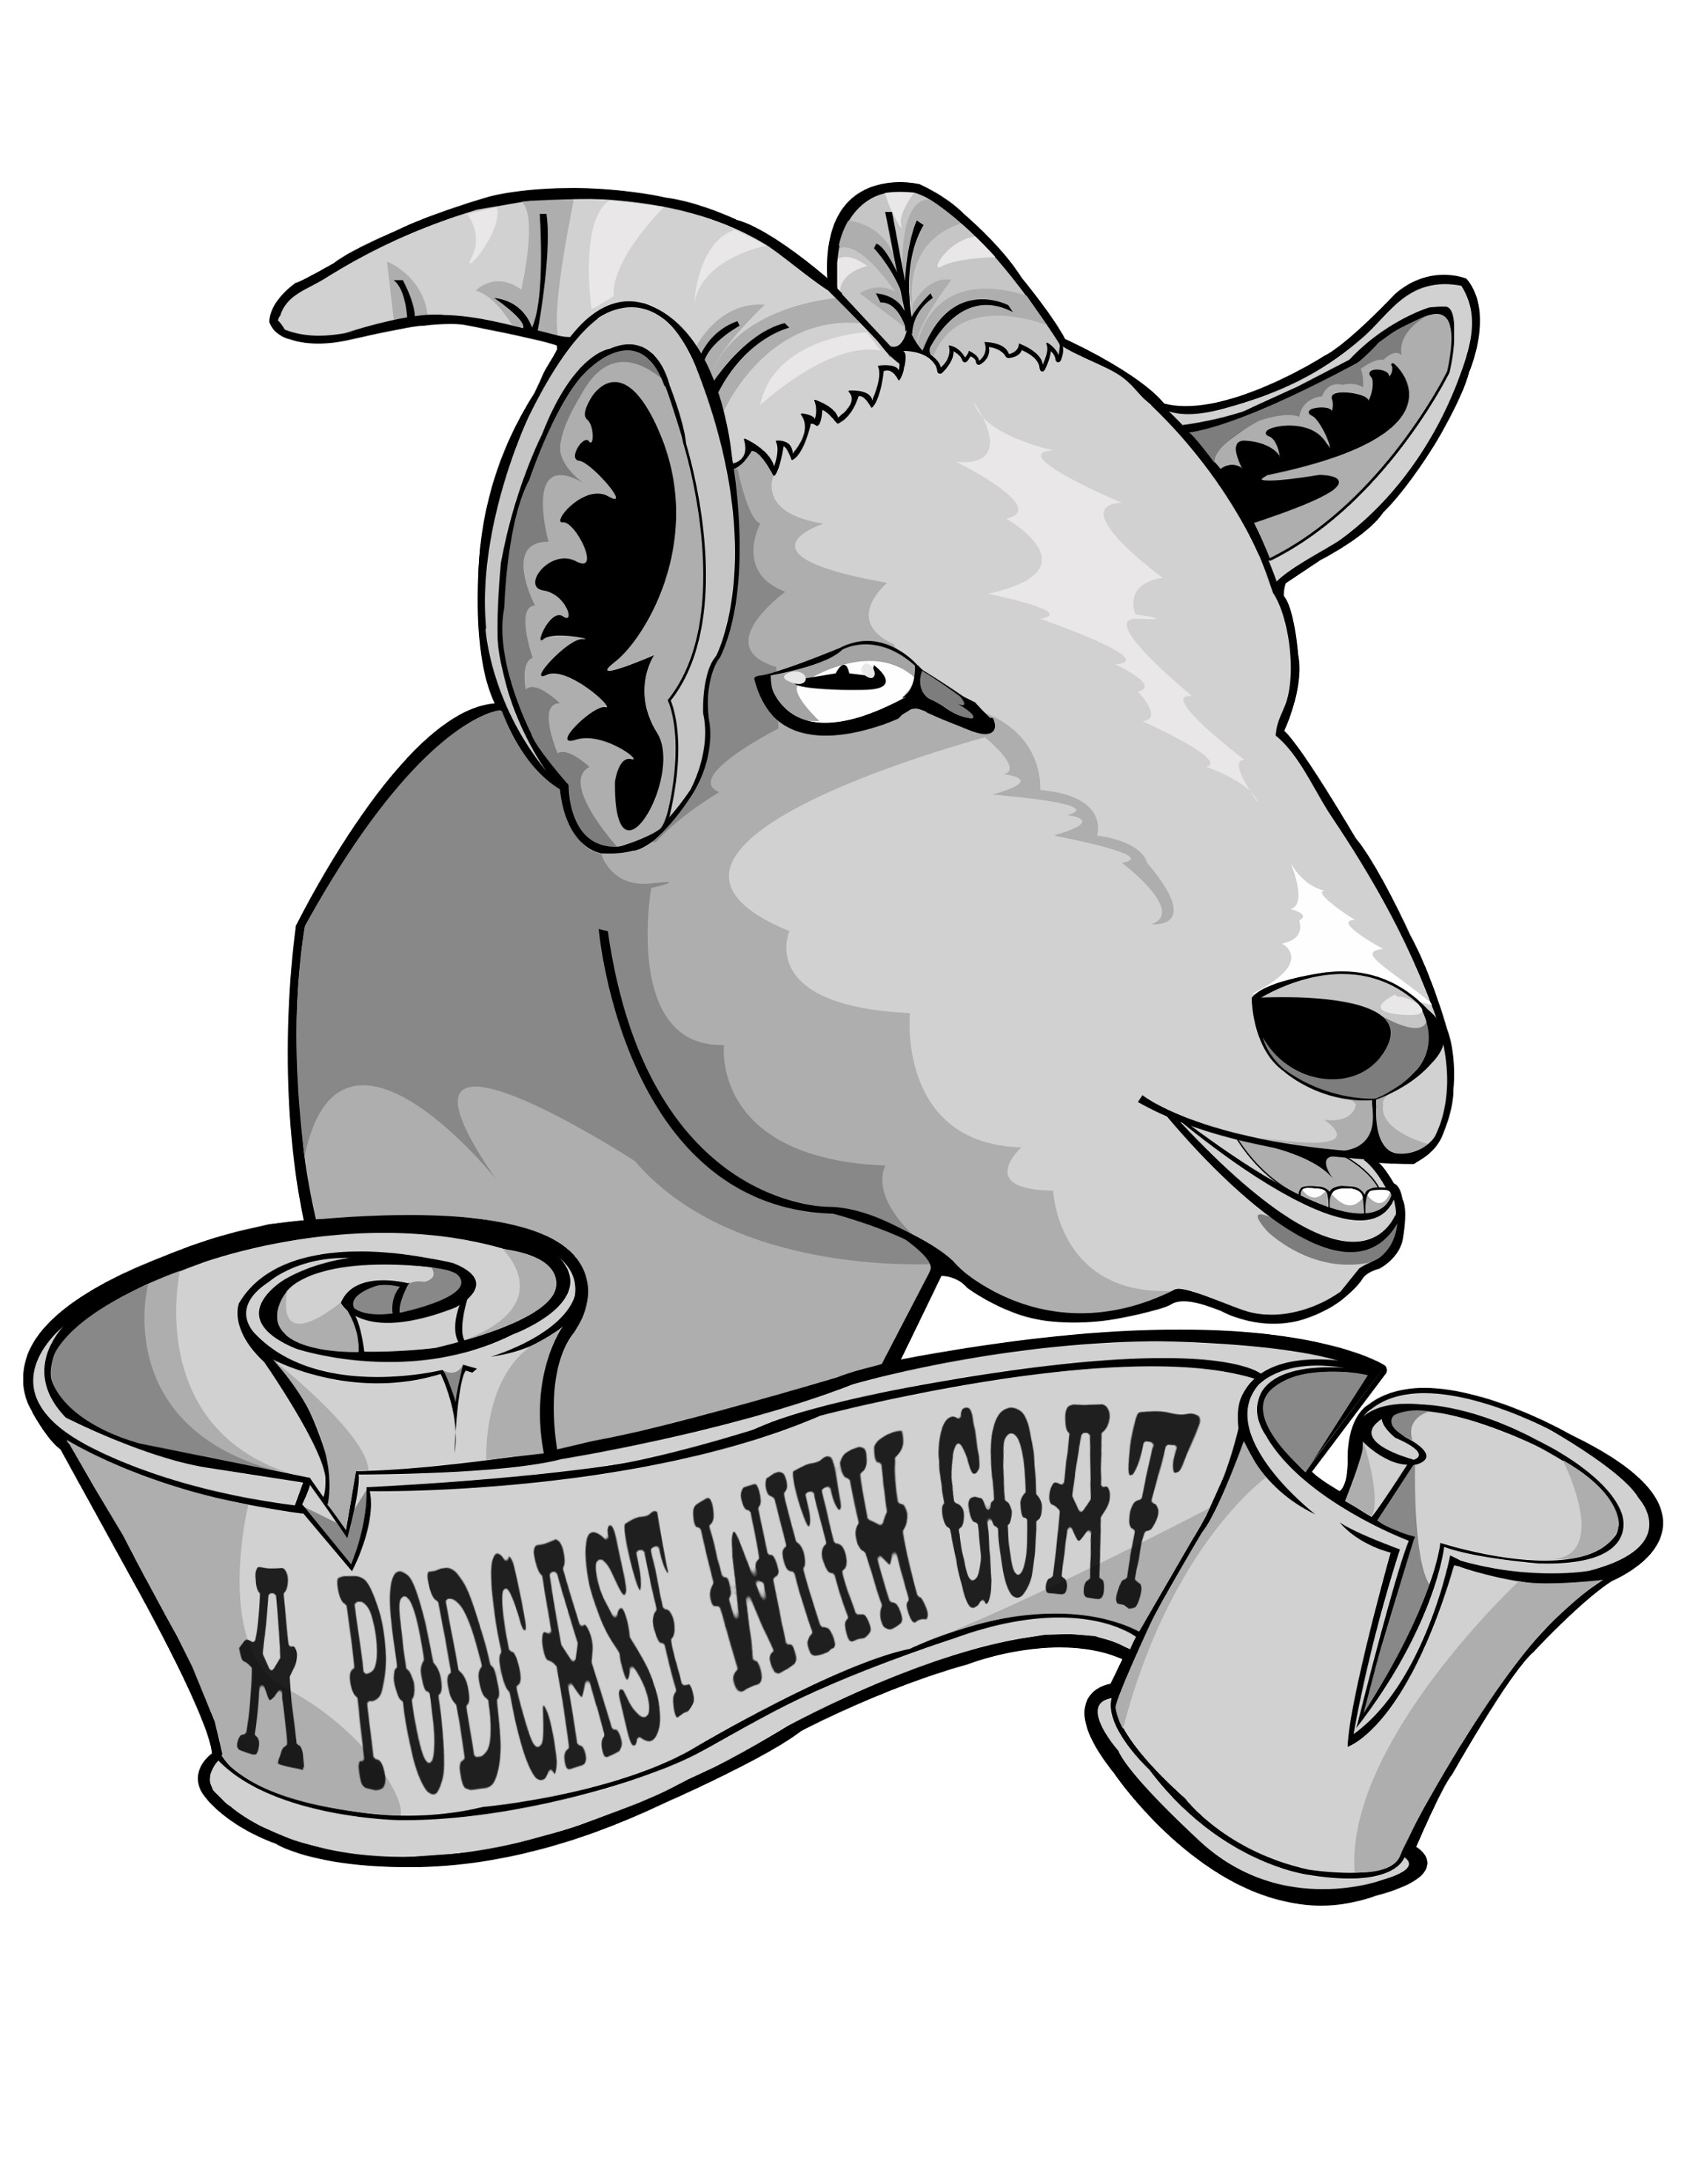 A Podcast With Goat